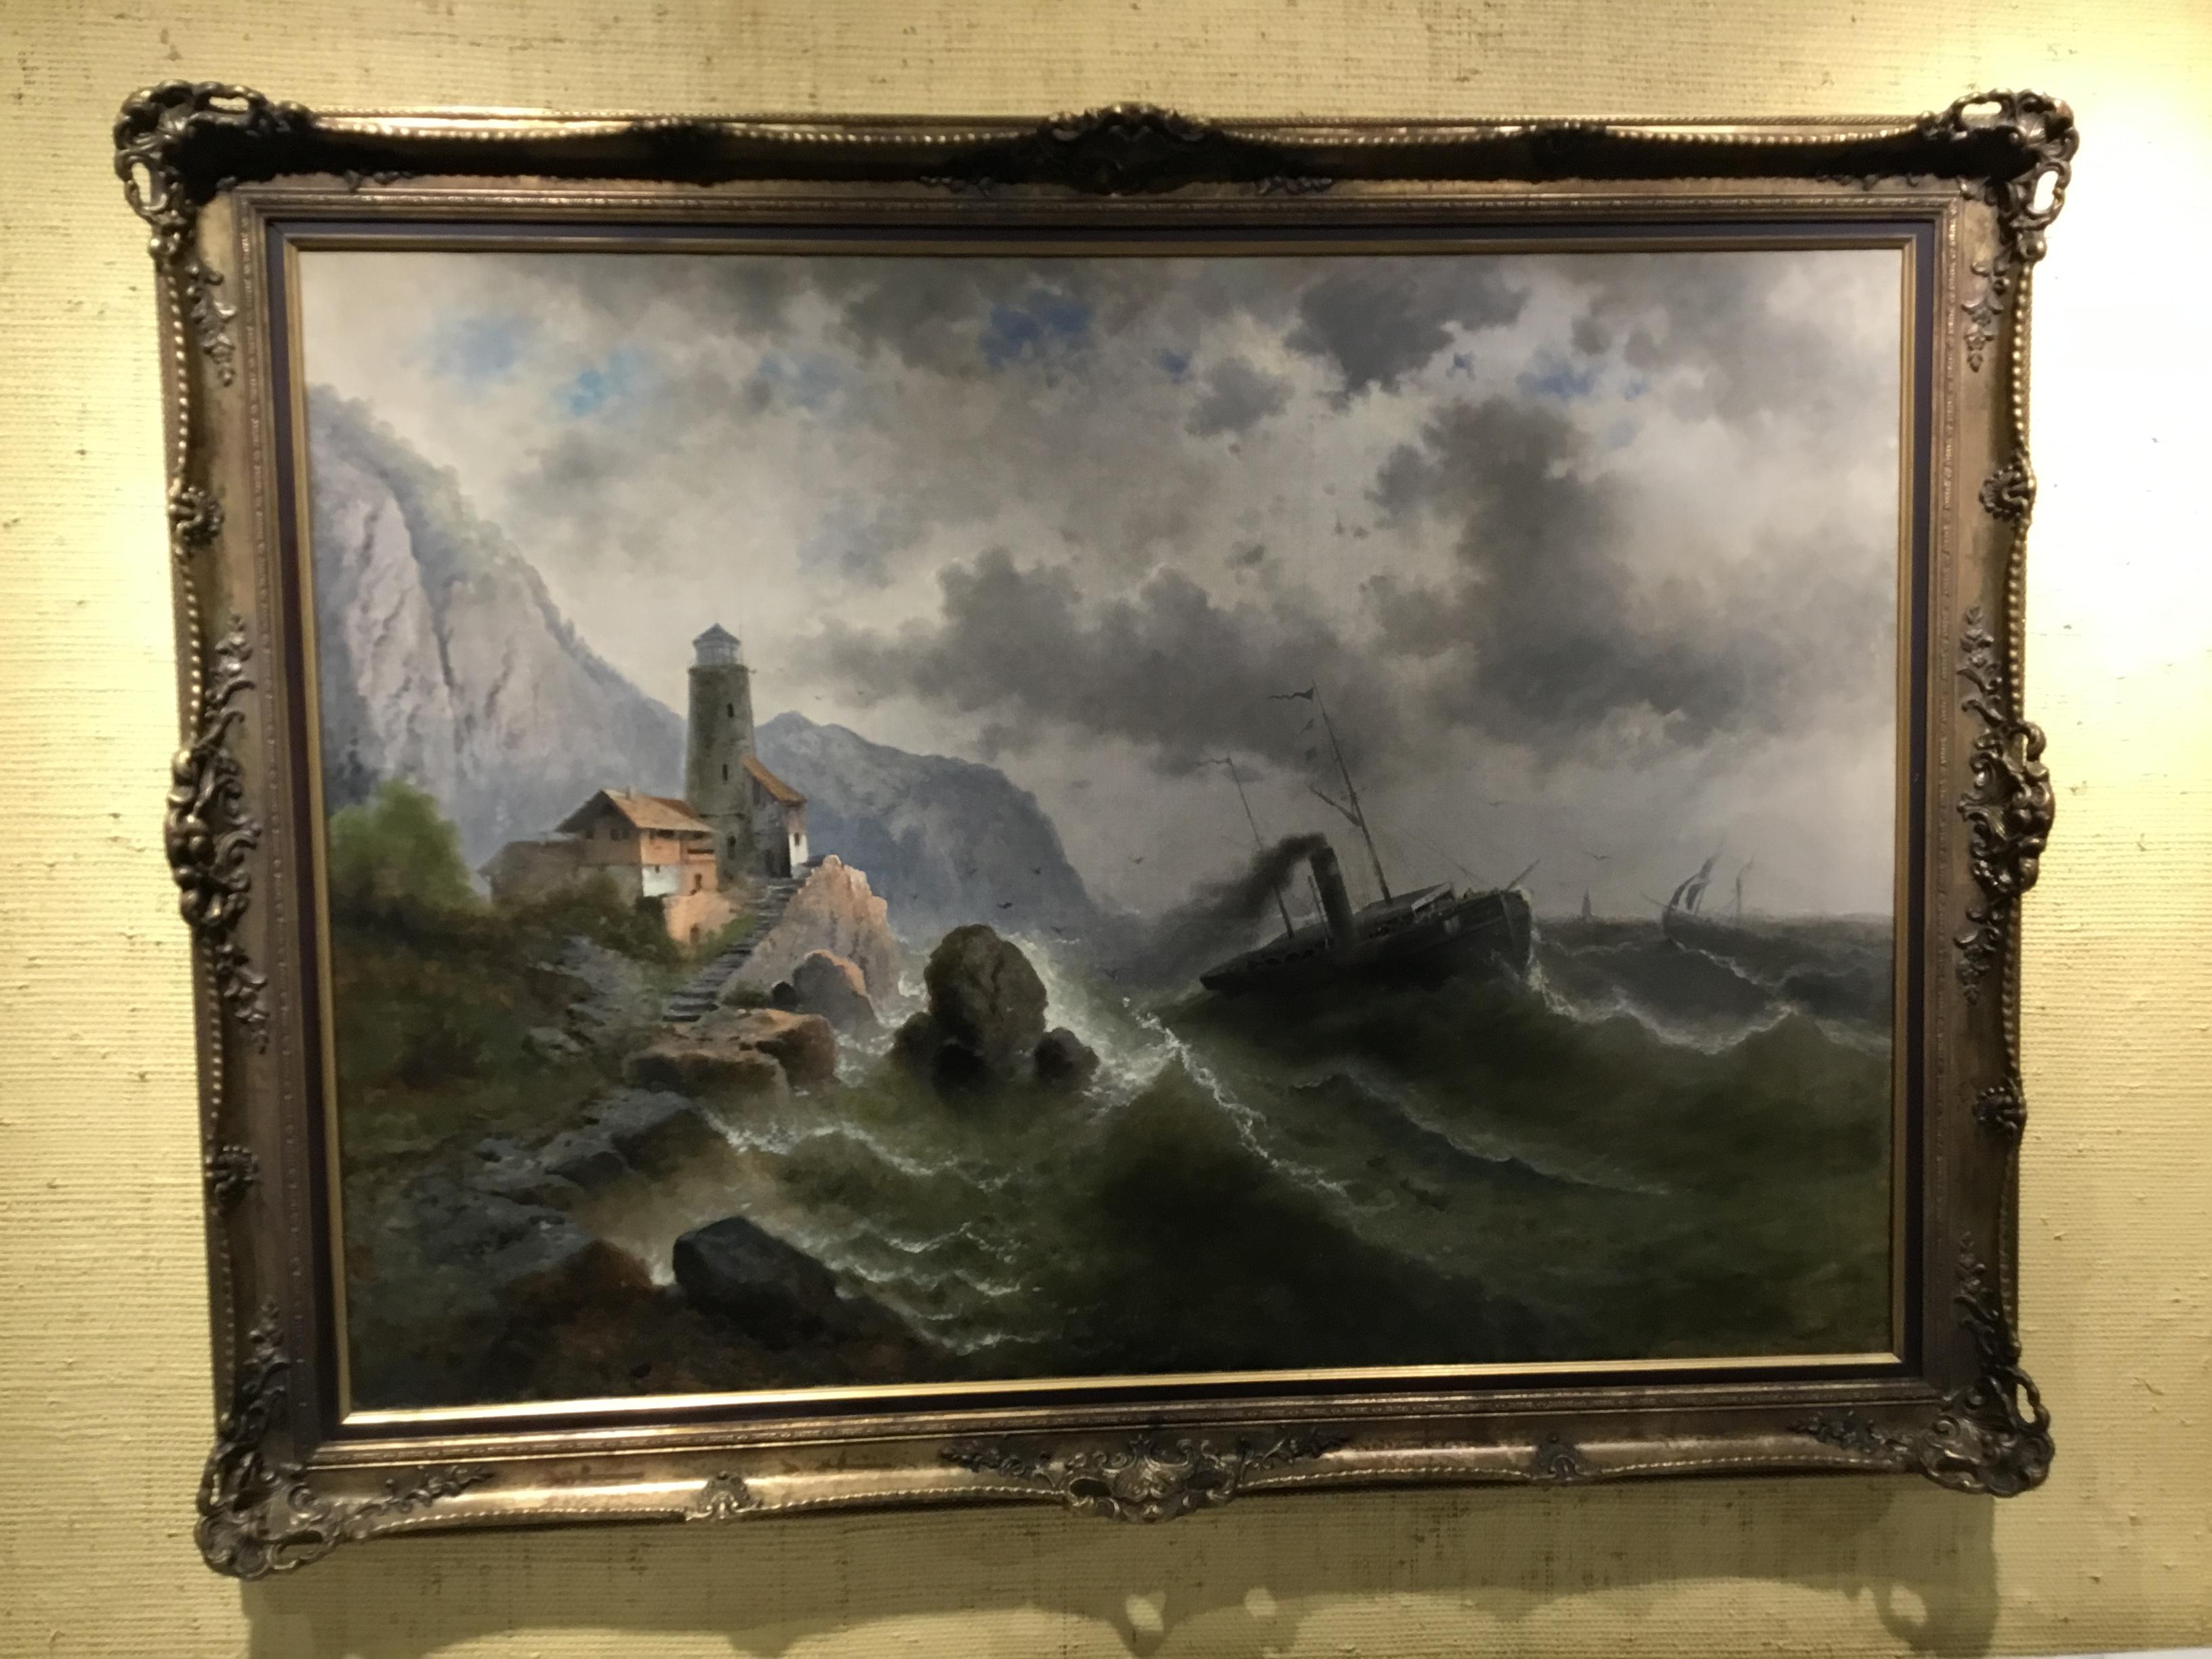 19th Century Painting  “ Steamship in a stormy Sea” 1850 Attributed to Albert Rieger